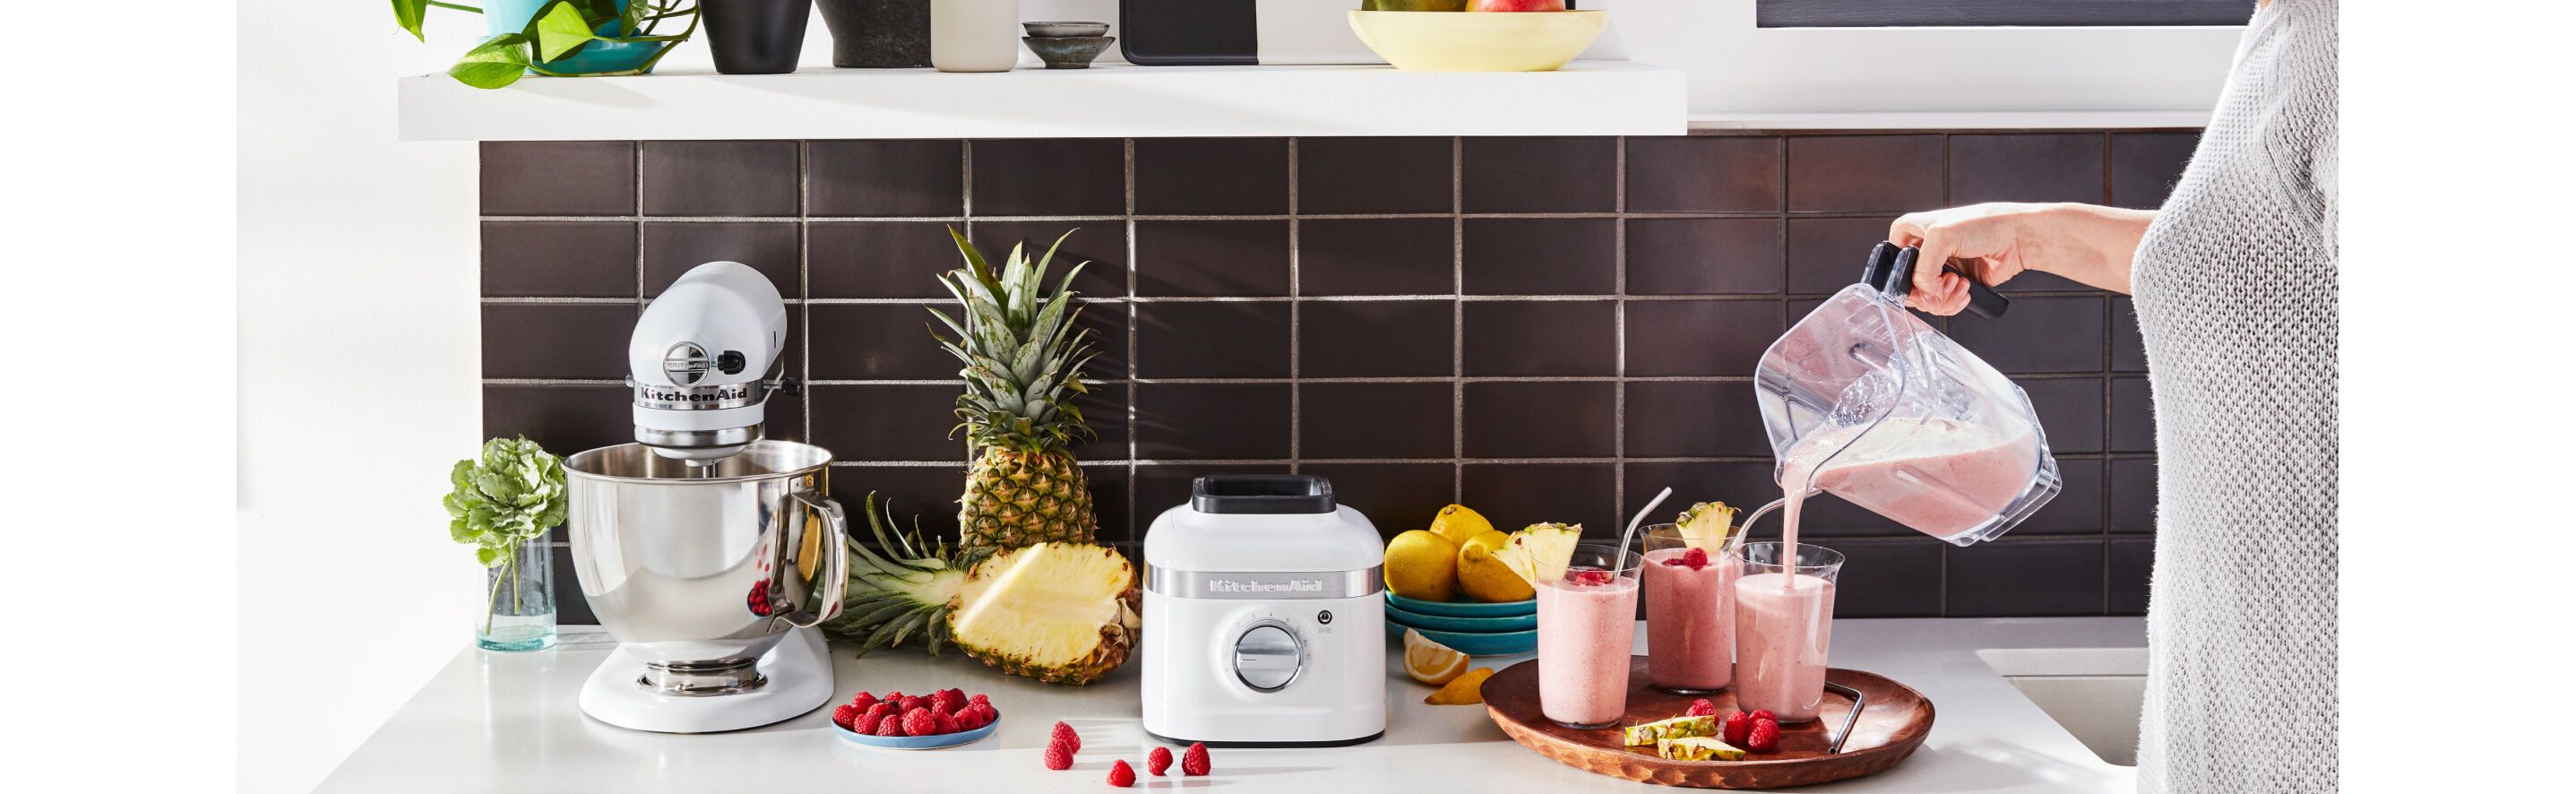 How to Make the Perfect Smoothie at Home | KitchenAid